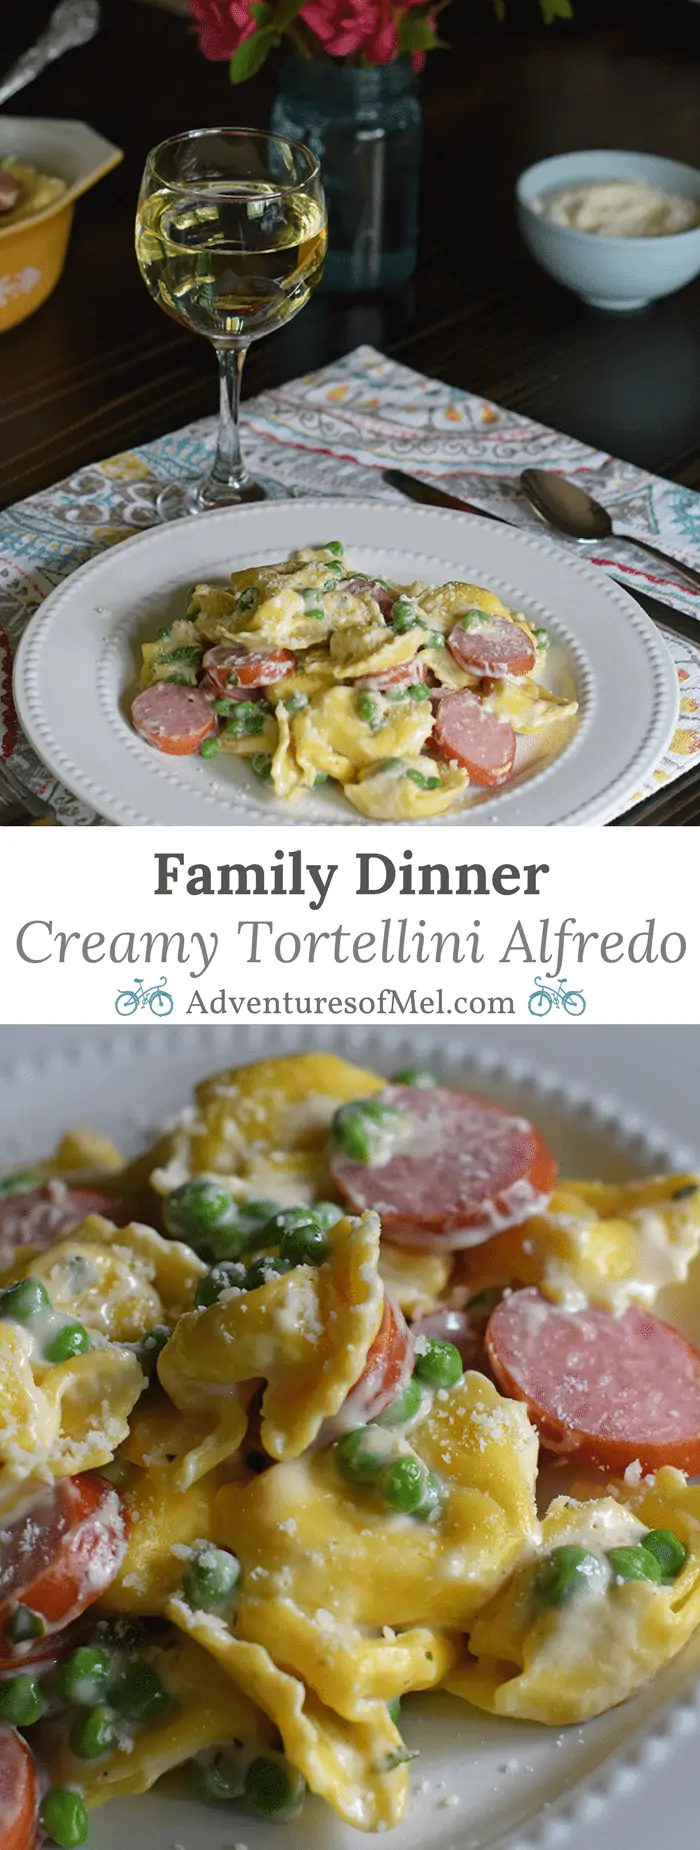 Bring your family back to the dinner table with a spring inspired, Tuscany inspired recipe for Creamy Tortellini Alfredo, a simple family dinner recipe that takes very little time to make, giving you more time with the ones you love. And don’t forget to add a few special touches to the table; after all, it’s the little things in life that are worth celebrating.